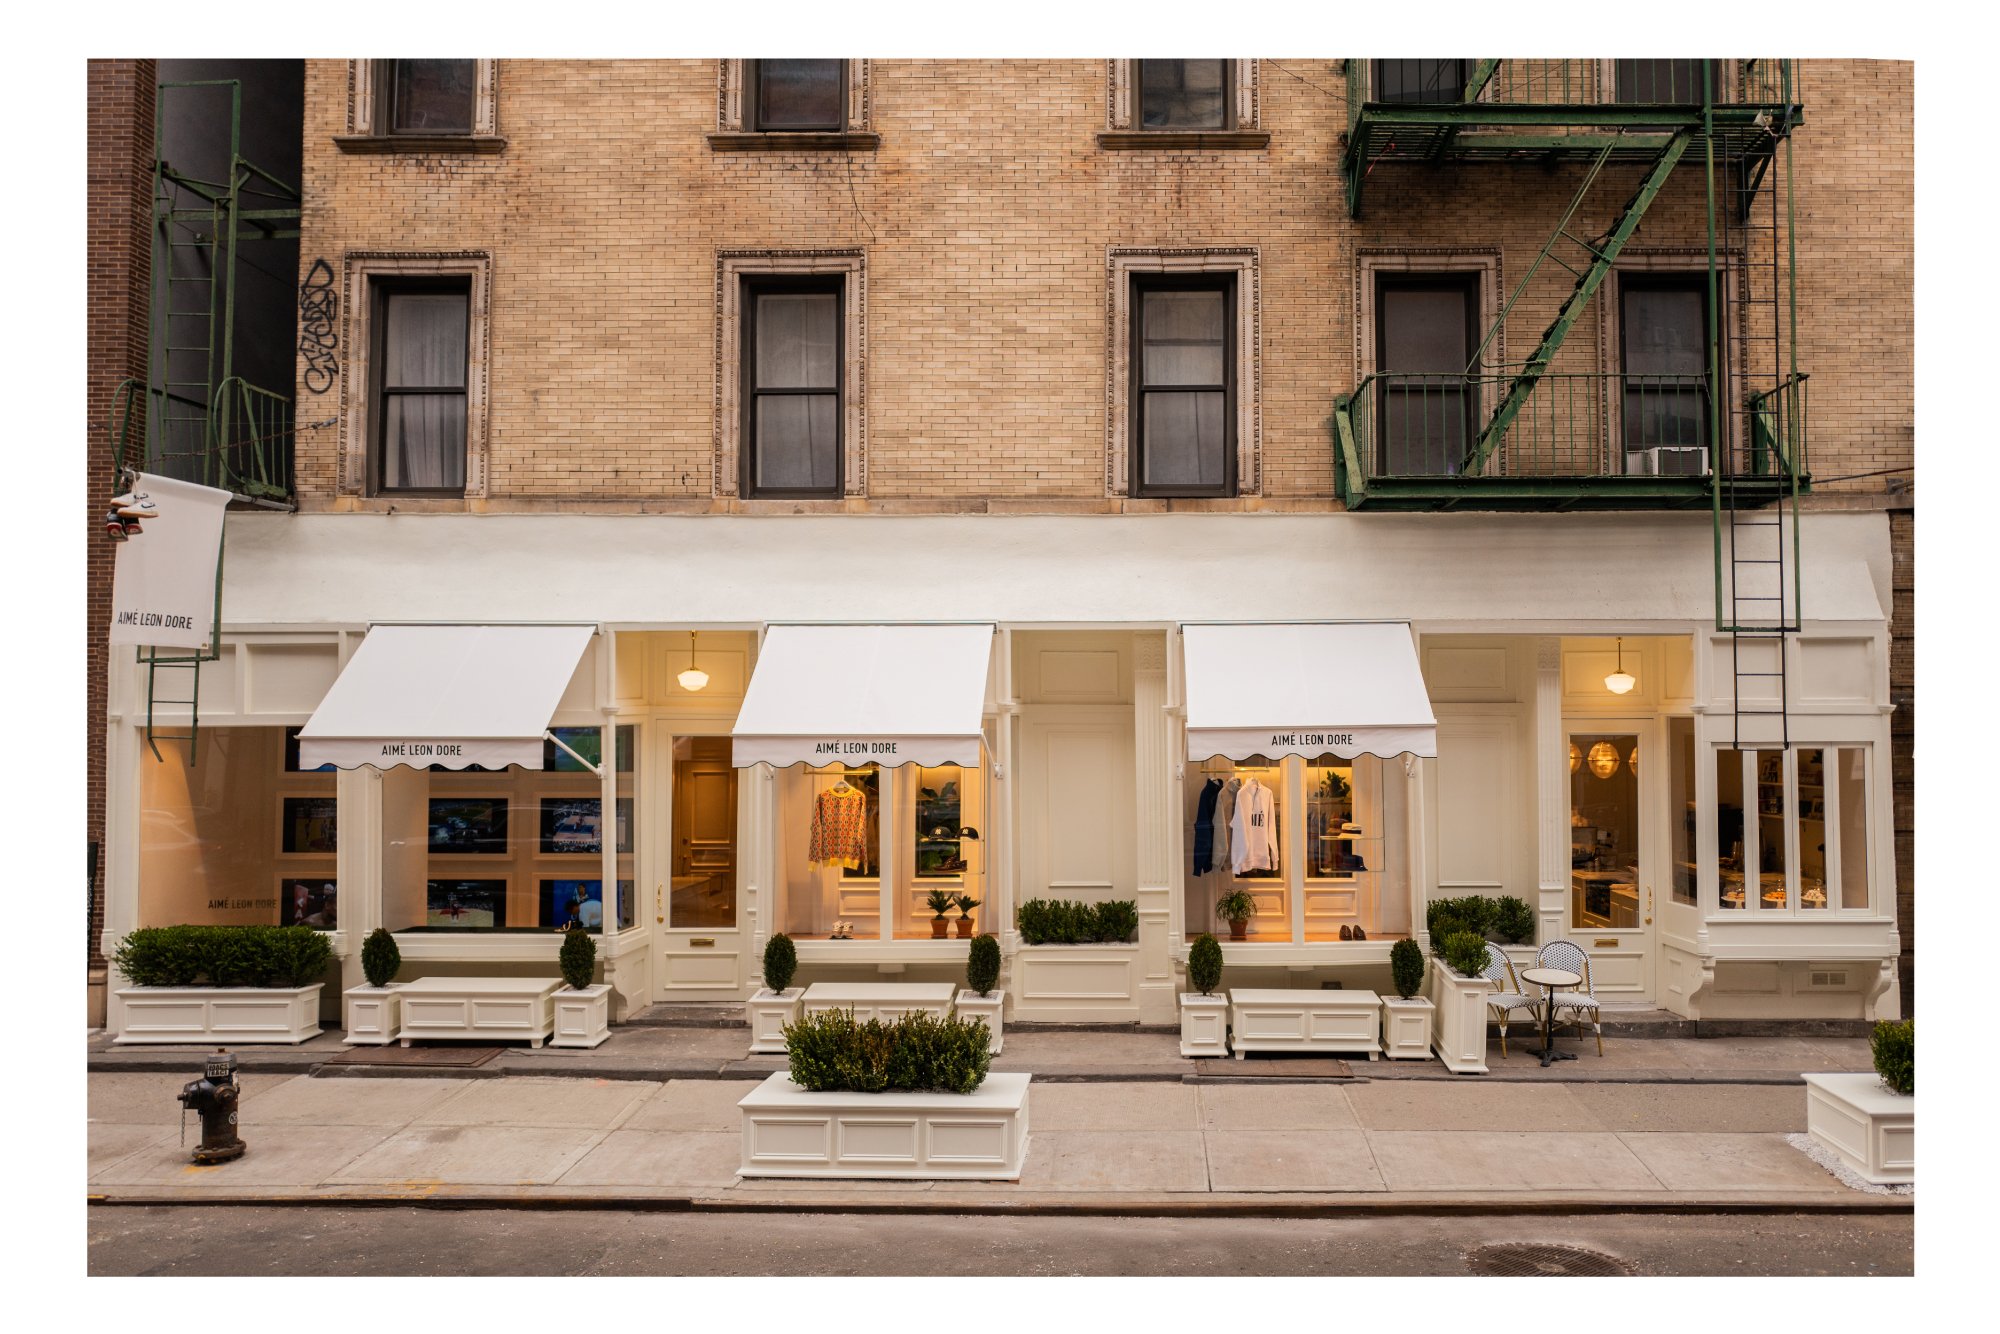 Aime Leon Dore : The Brand from NYC • Centreville Store